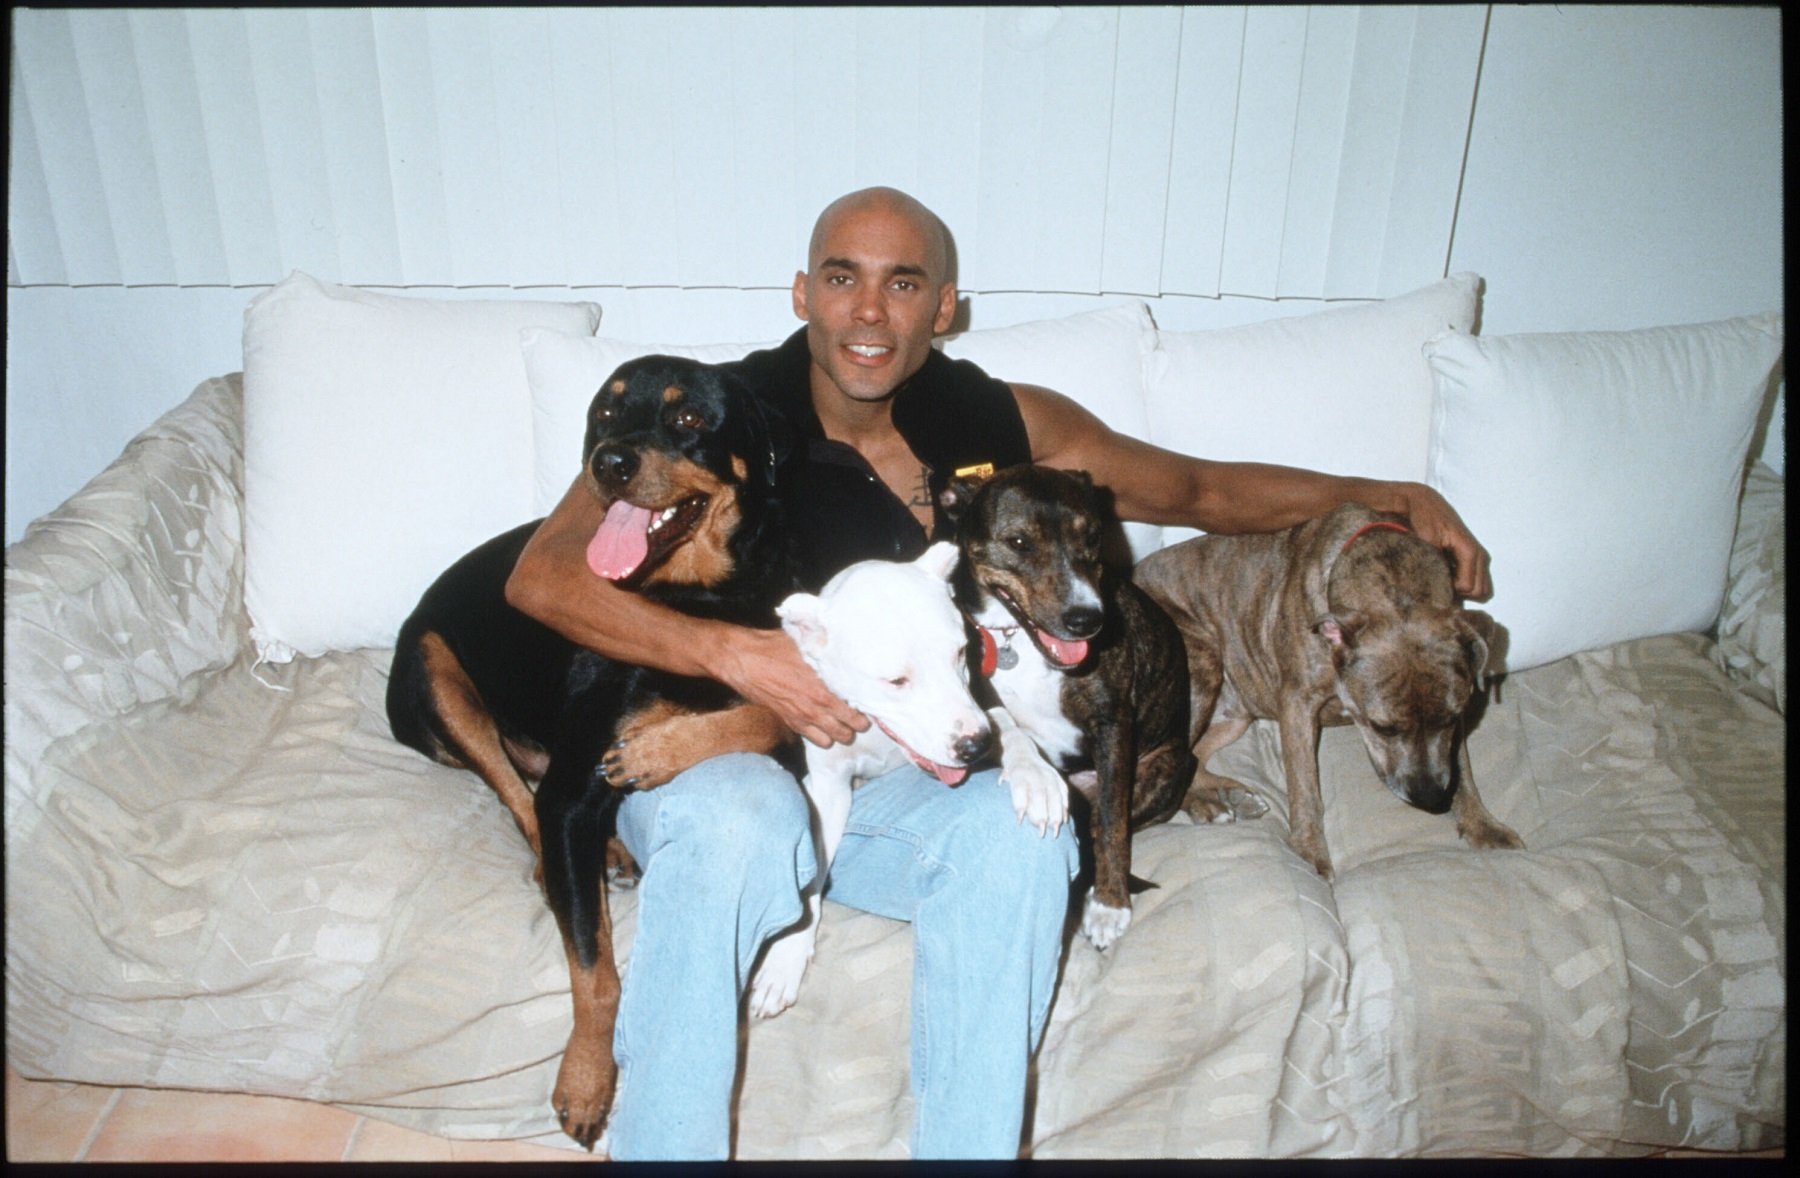 General Hospital star Réal Andrews in blue jeans and surrounded by dogs